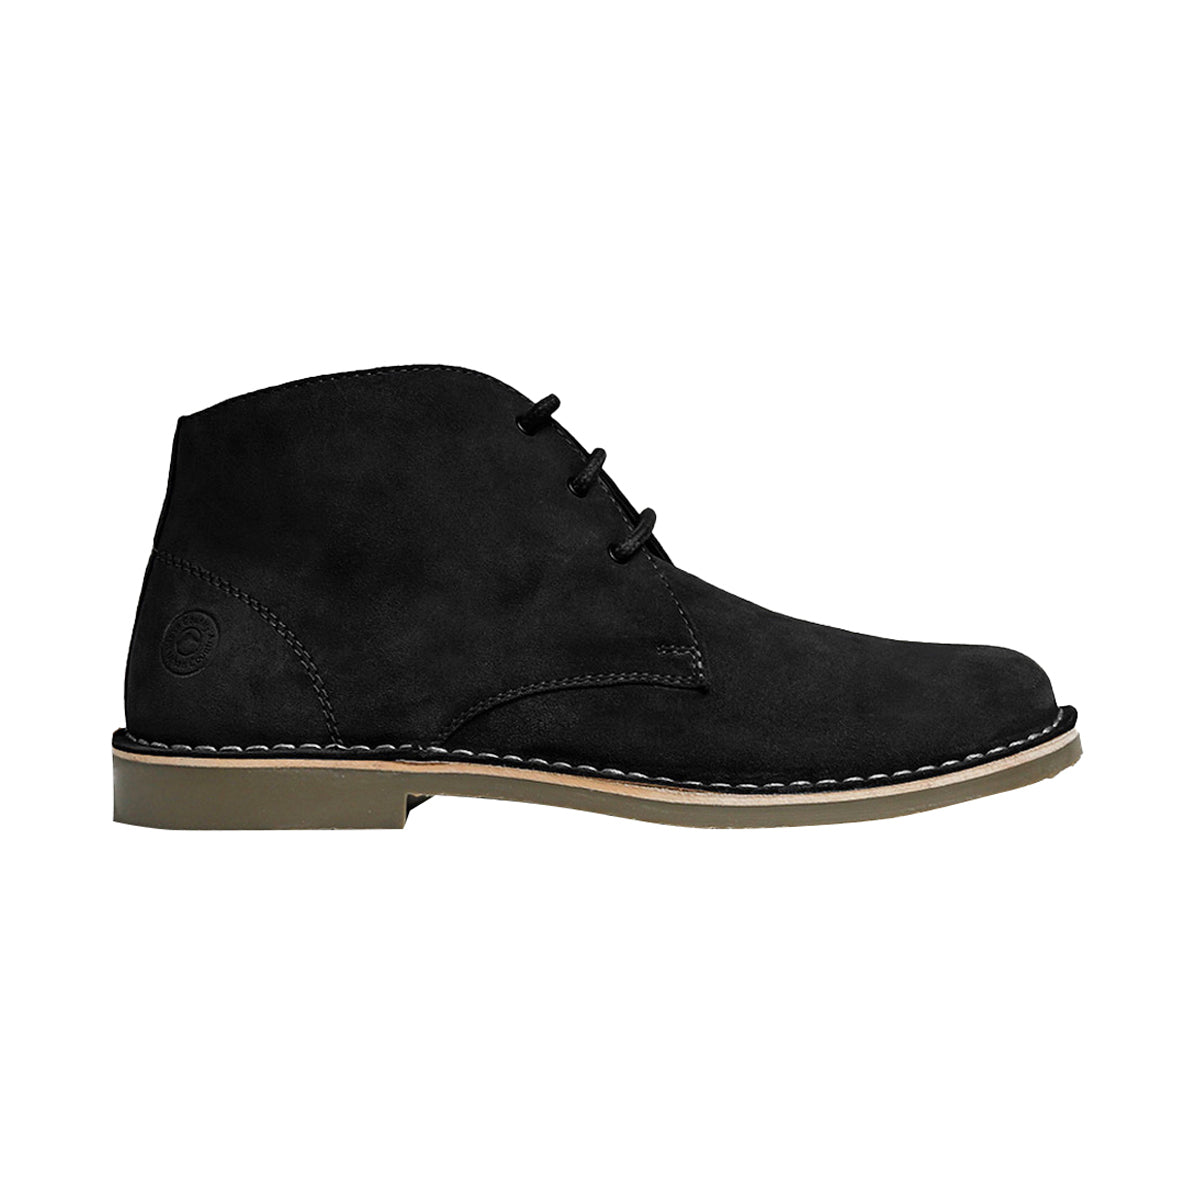 Men Suede  Leather Chukka  Boots ǀ STEVE 1357